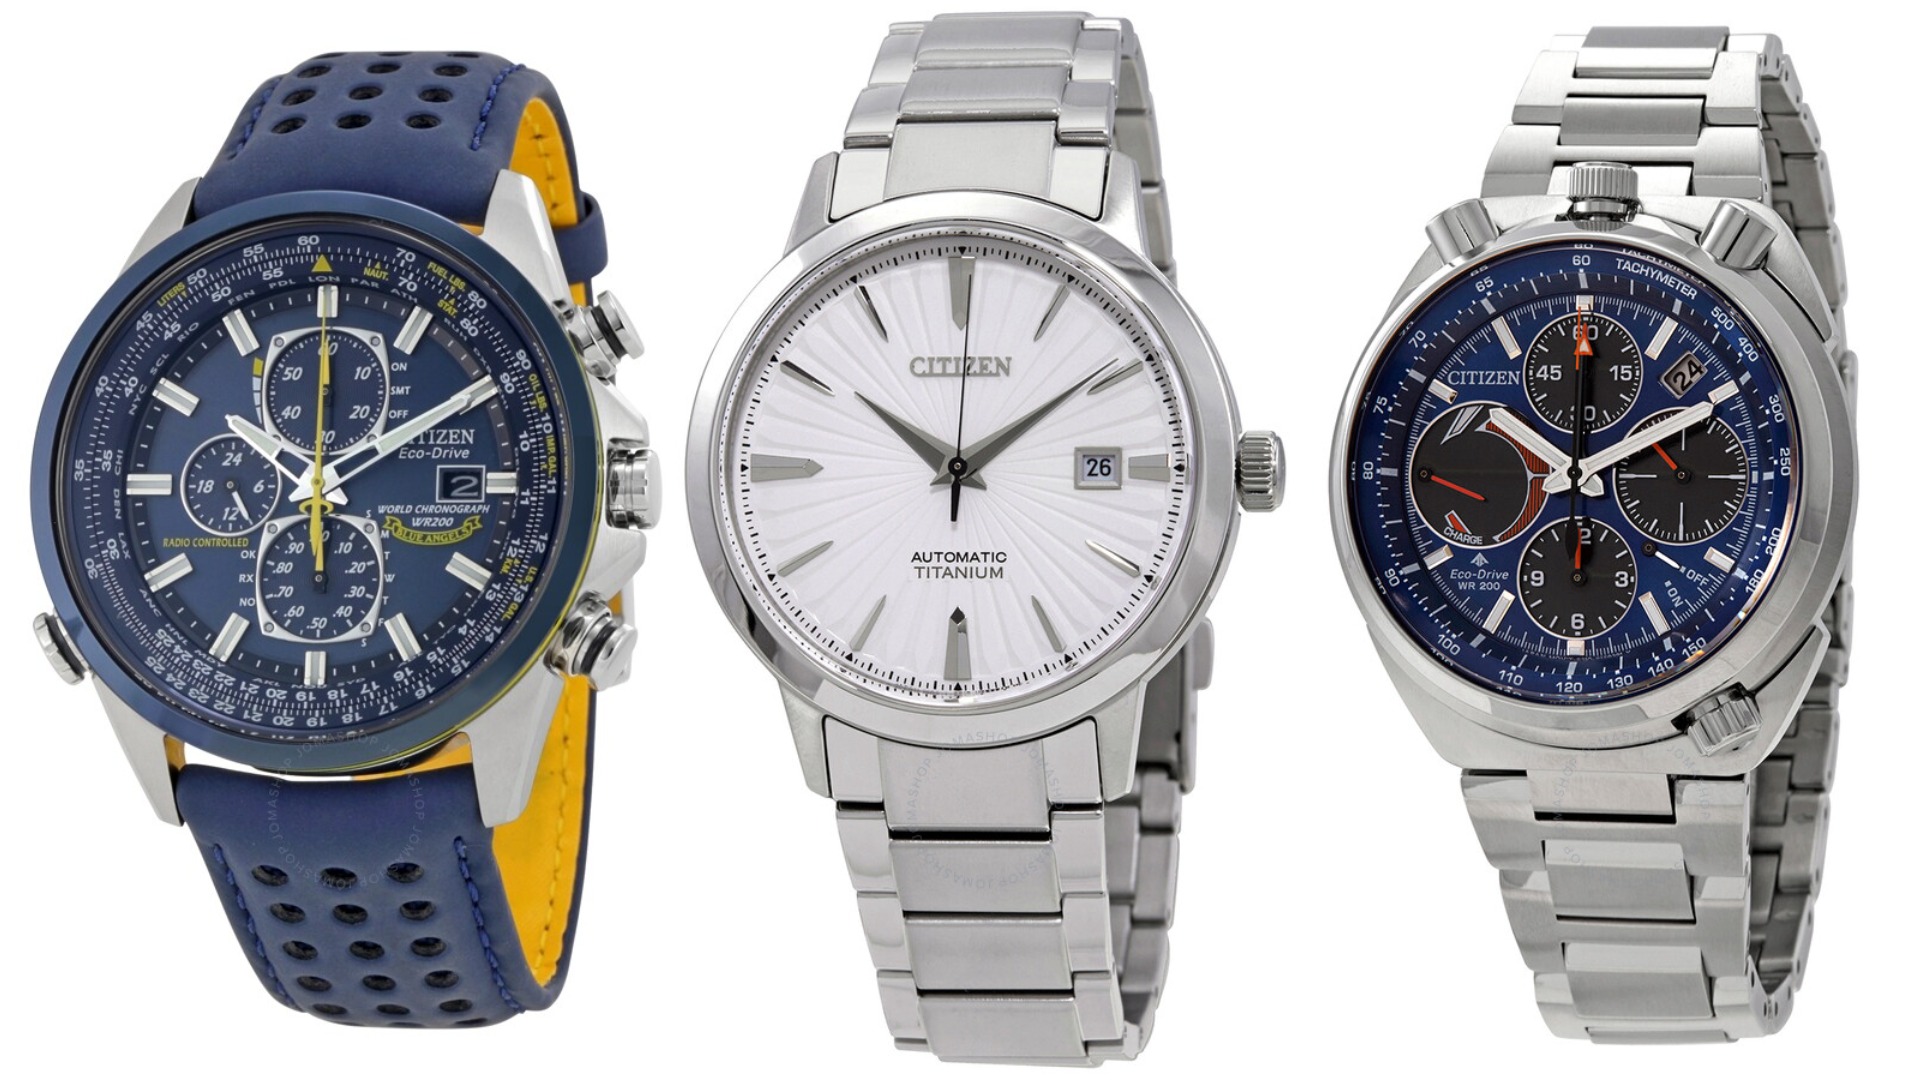 Citizen watches are on sale for 50% off at Jomashop's graduation sale